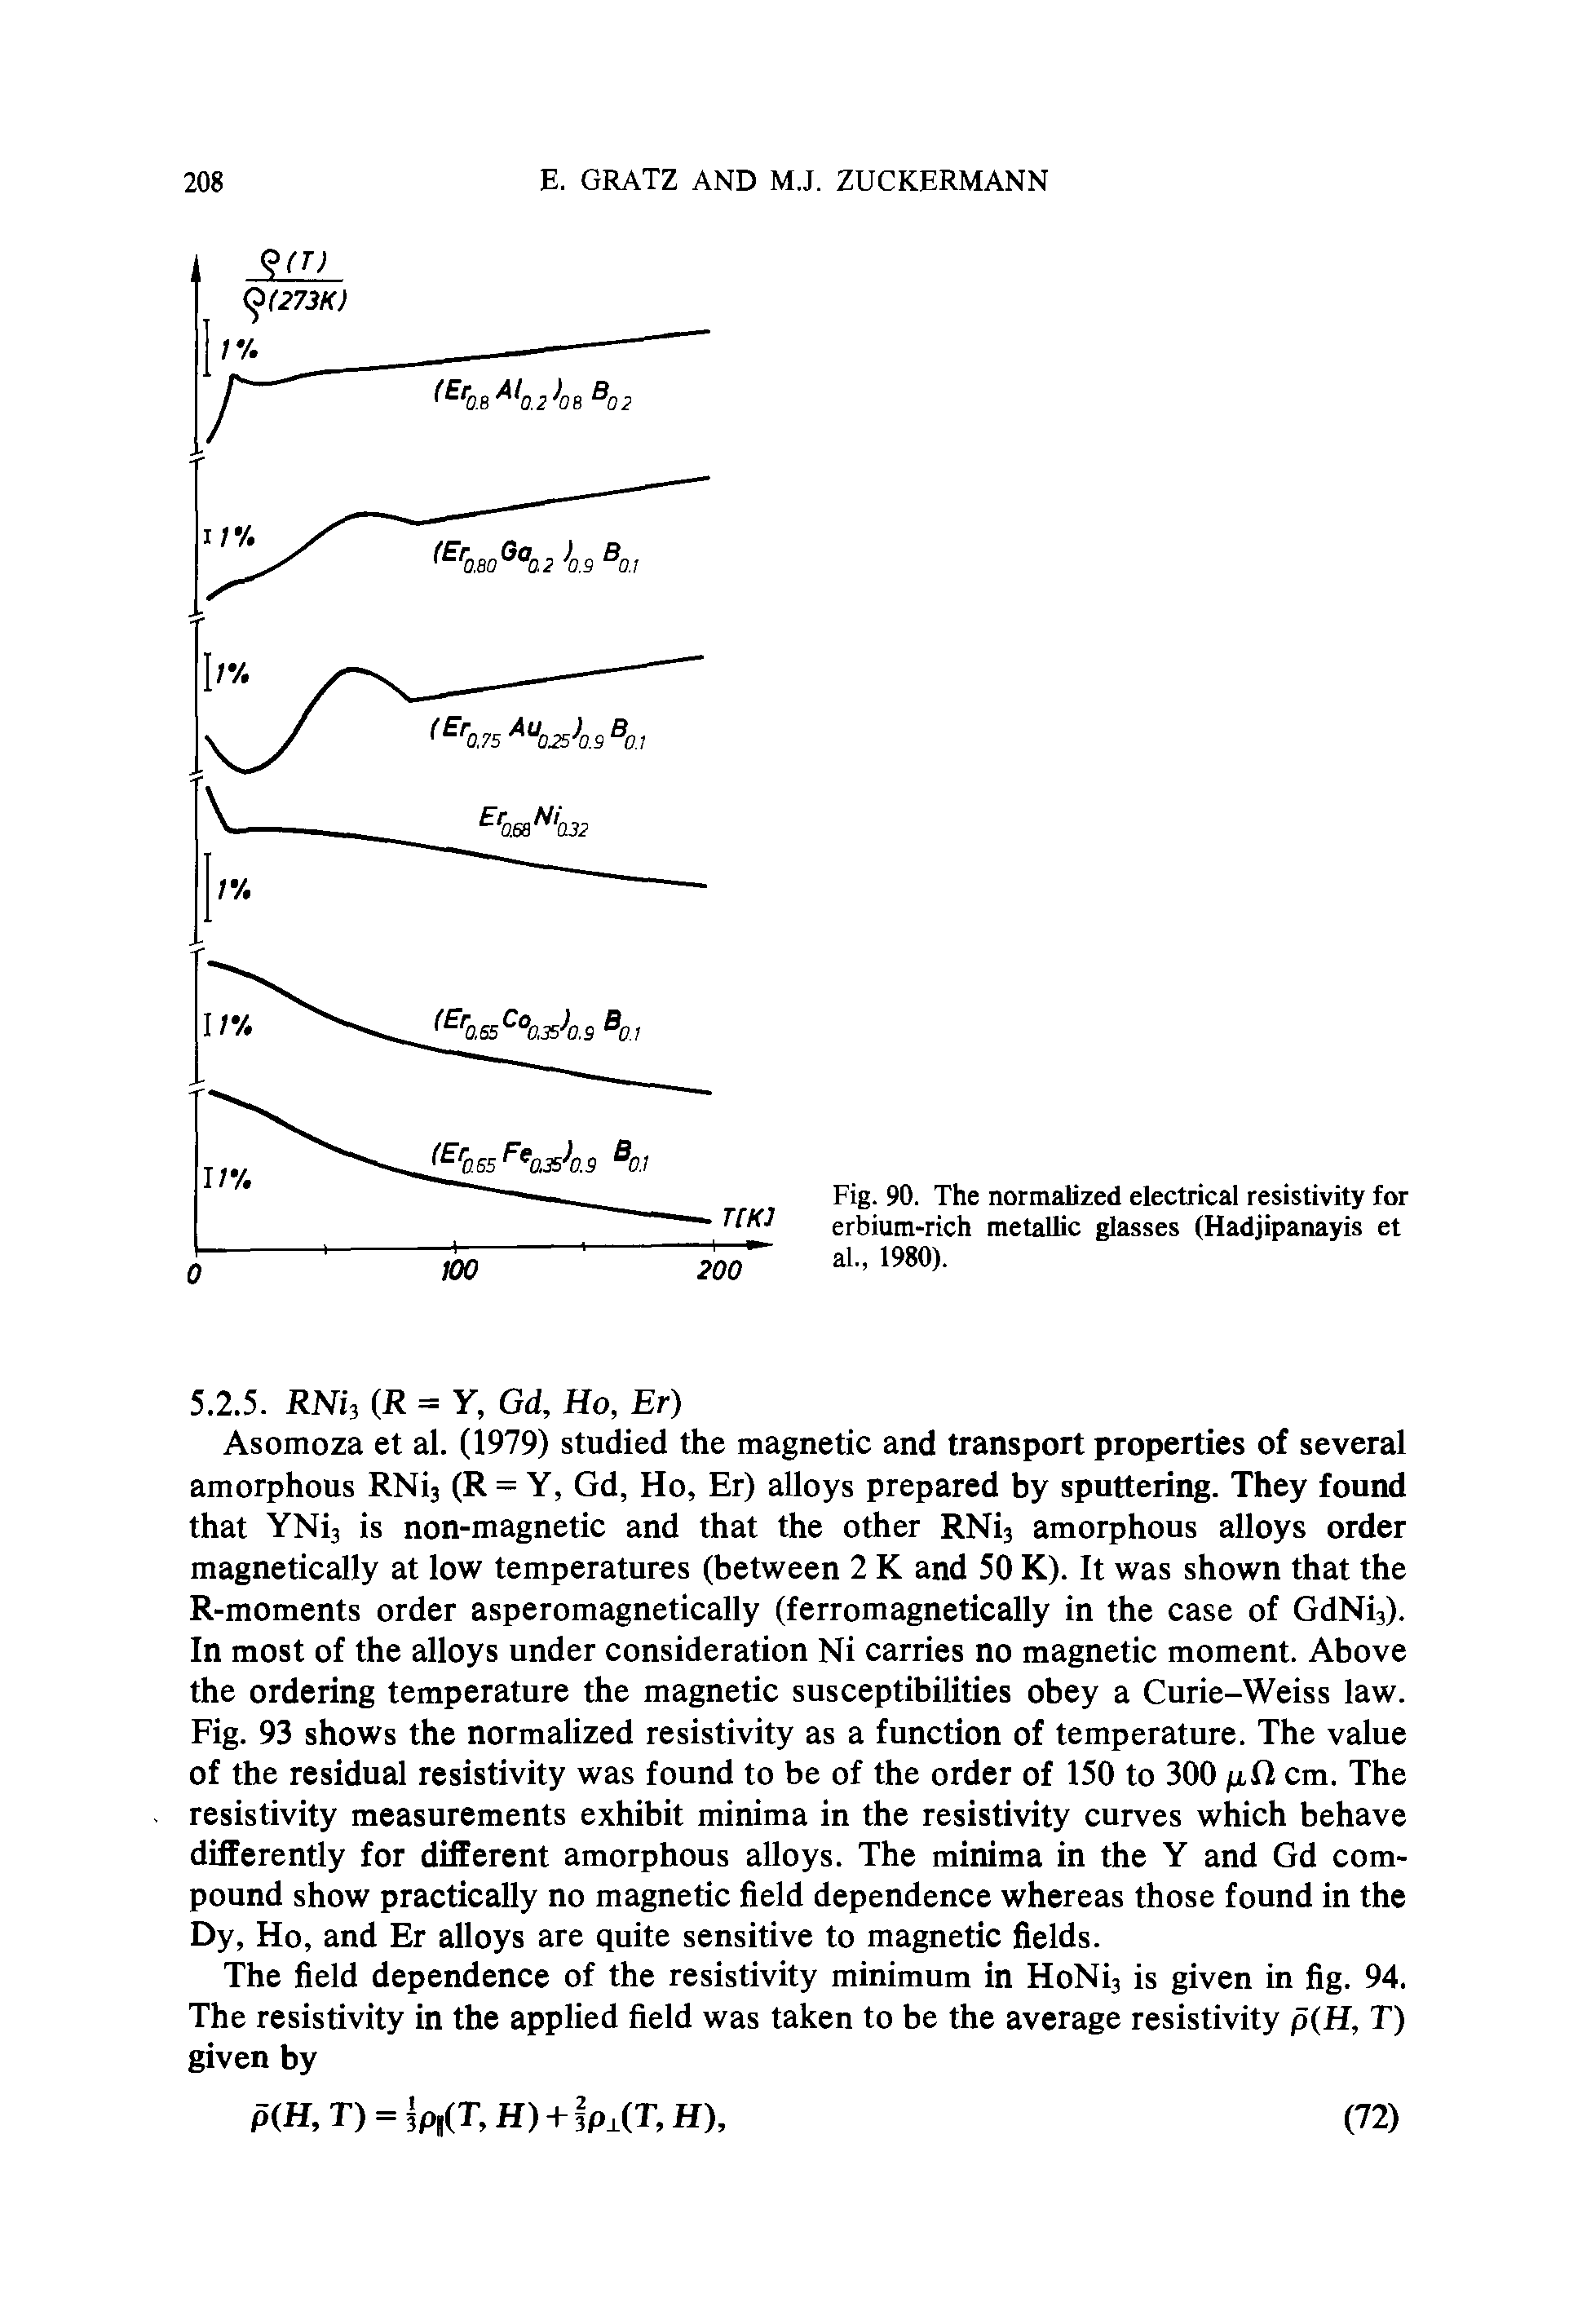 Fig. 90. The normalized electrical resistivity for erbium-rich metallic glasses (Hadjipanayis et al., 1980).